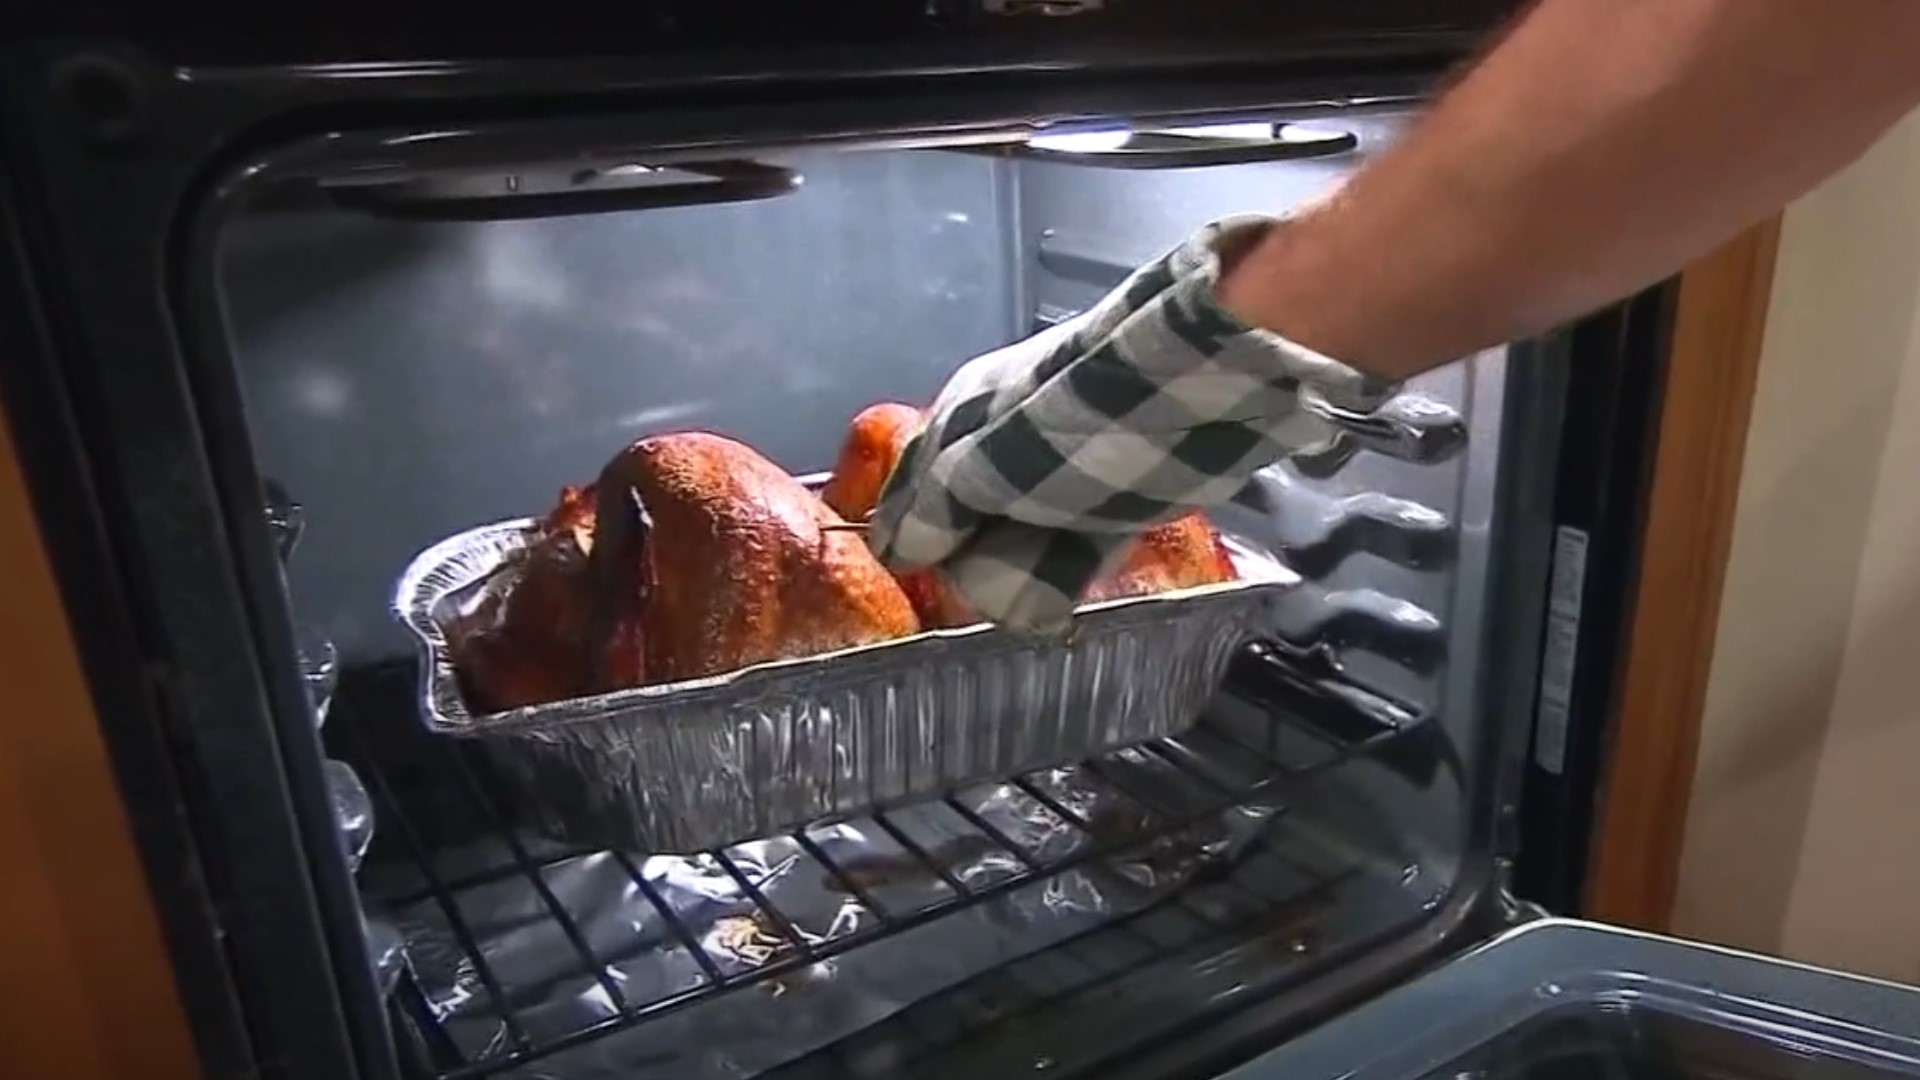 The American Farm Bureau Federation's latest survey says the average price for Thanksgiving dinner is up to 14% compared to 2020.